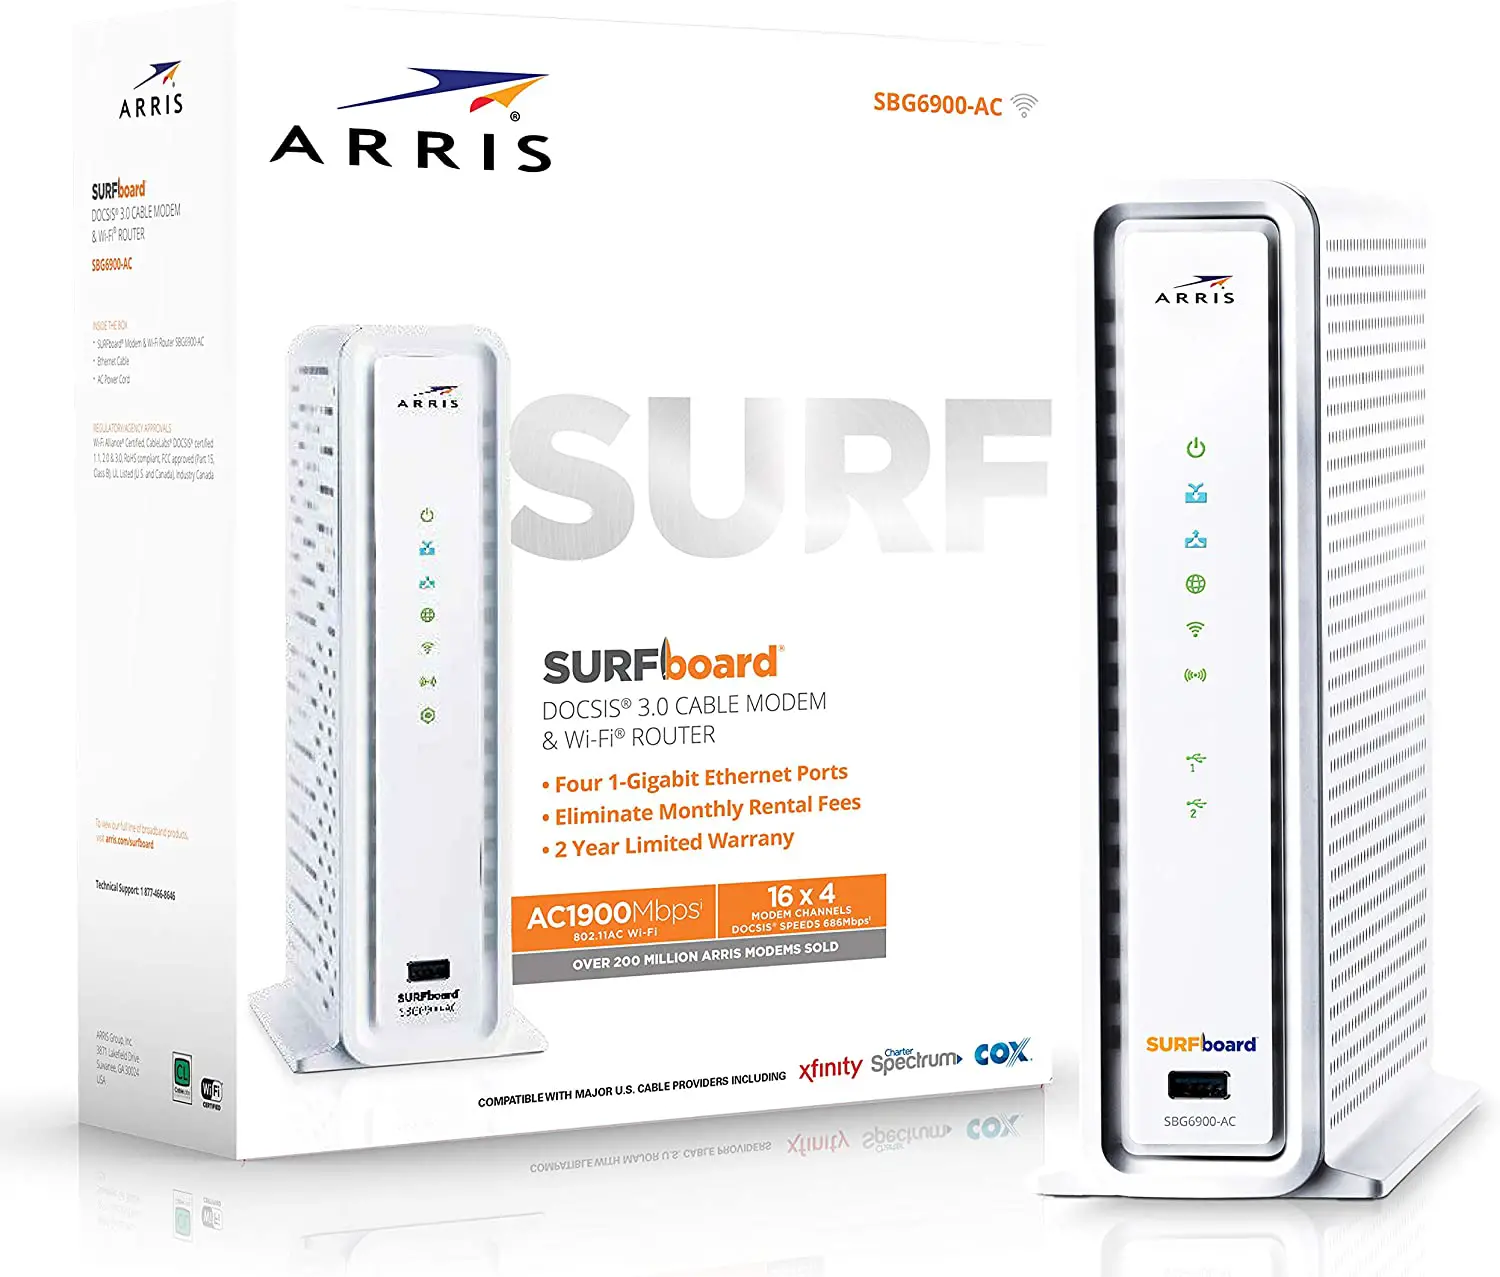 White Arris SBG6900-AC Modem-Router with box